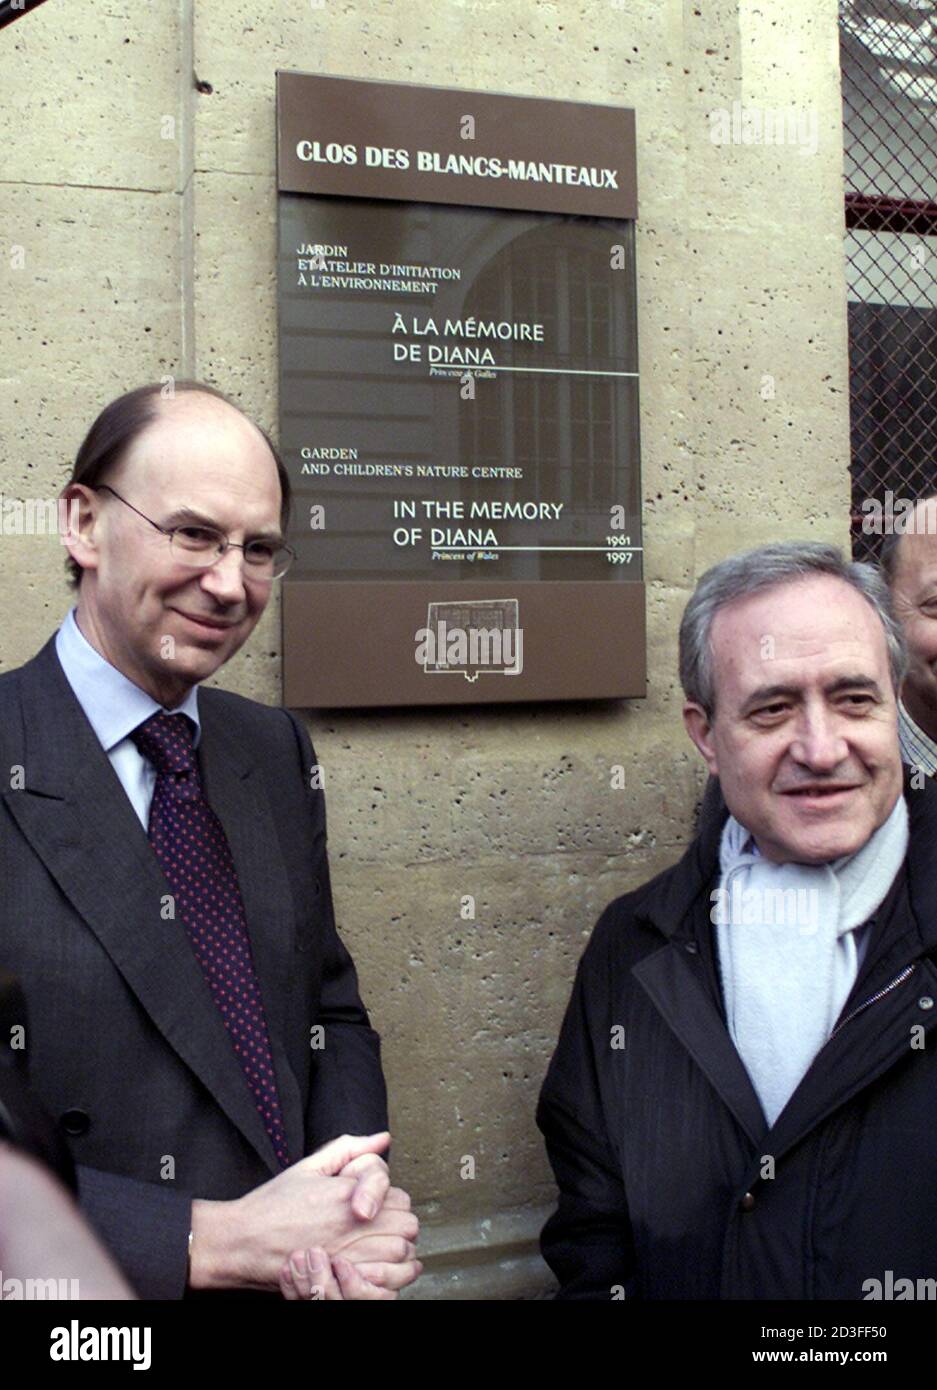 Michael Jay, British ambassador to France (L) poses with Paris mayor Jean  Tiberi at the entrance of the "Clos des Blancs Manteaux" garden and  children's nature centre in Paris during a ceremony